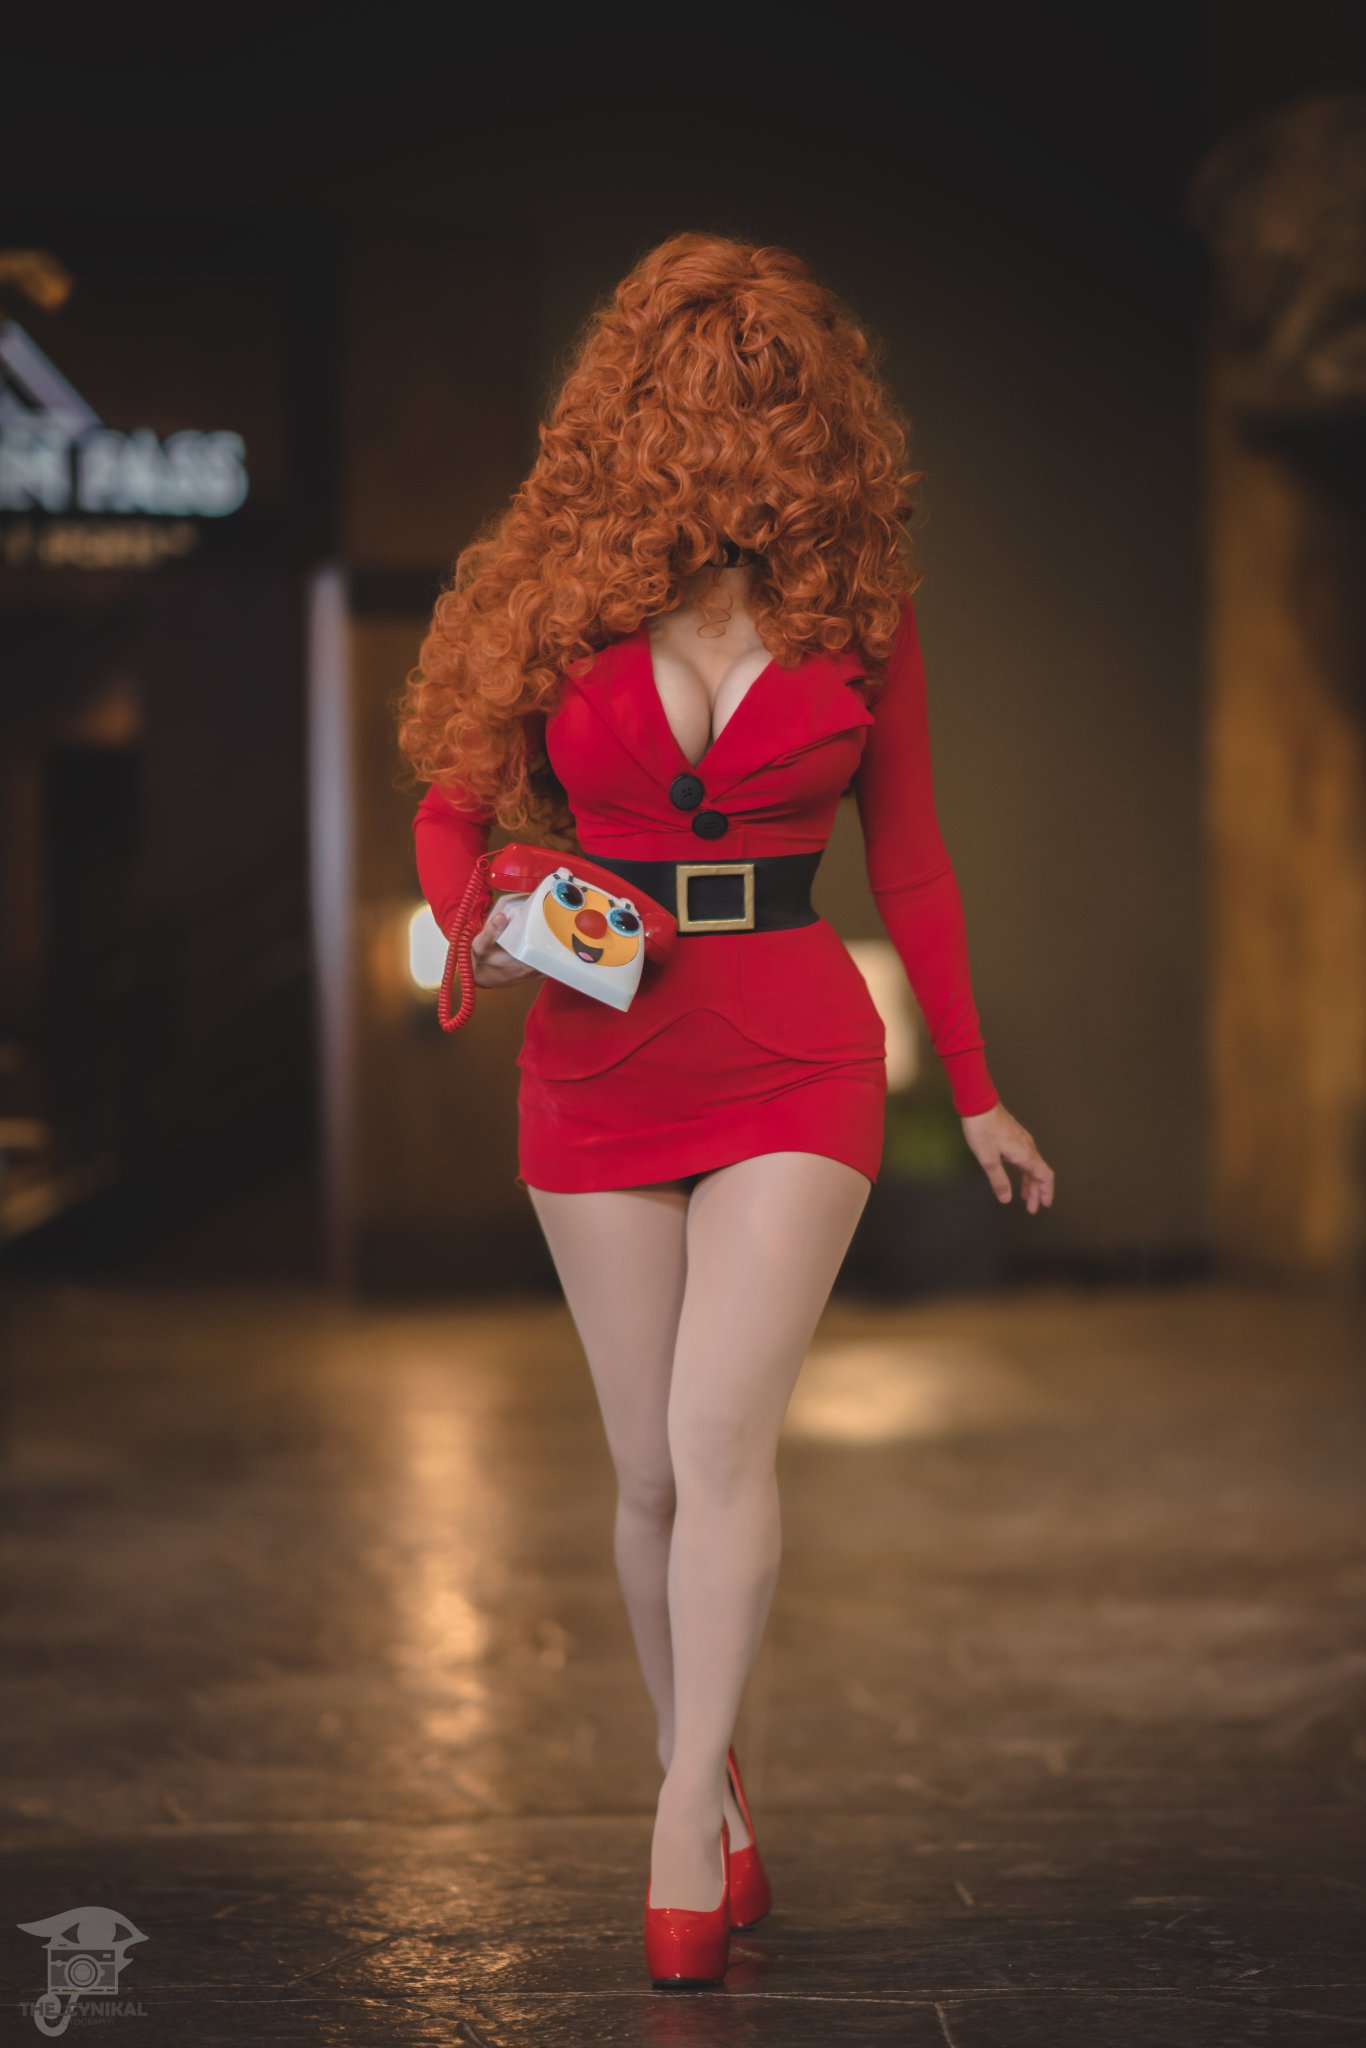 Khainsaw On Twitter More Sara Bellum Cosplay From Ndk Shot By Thecynikal